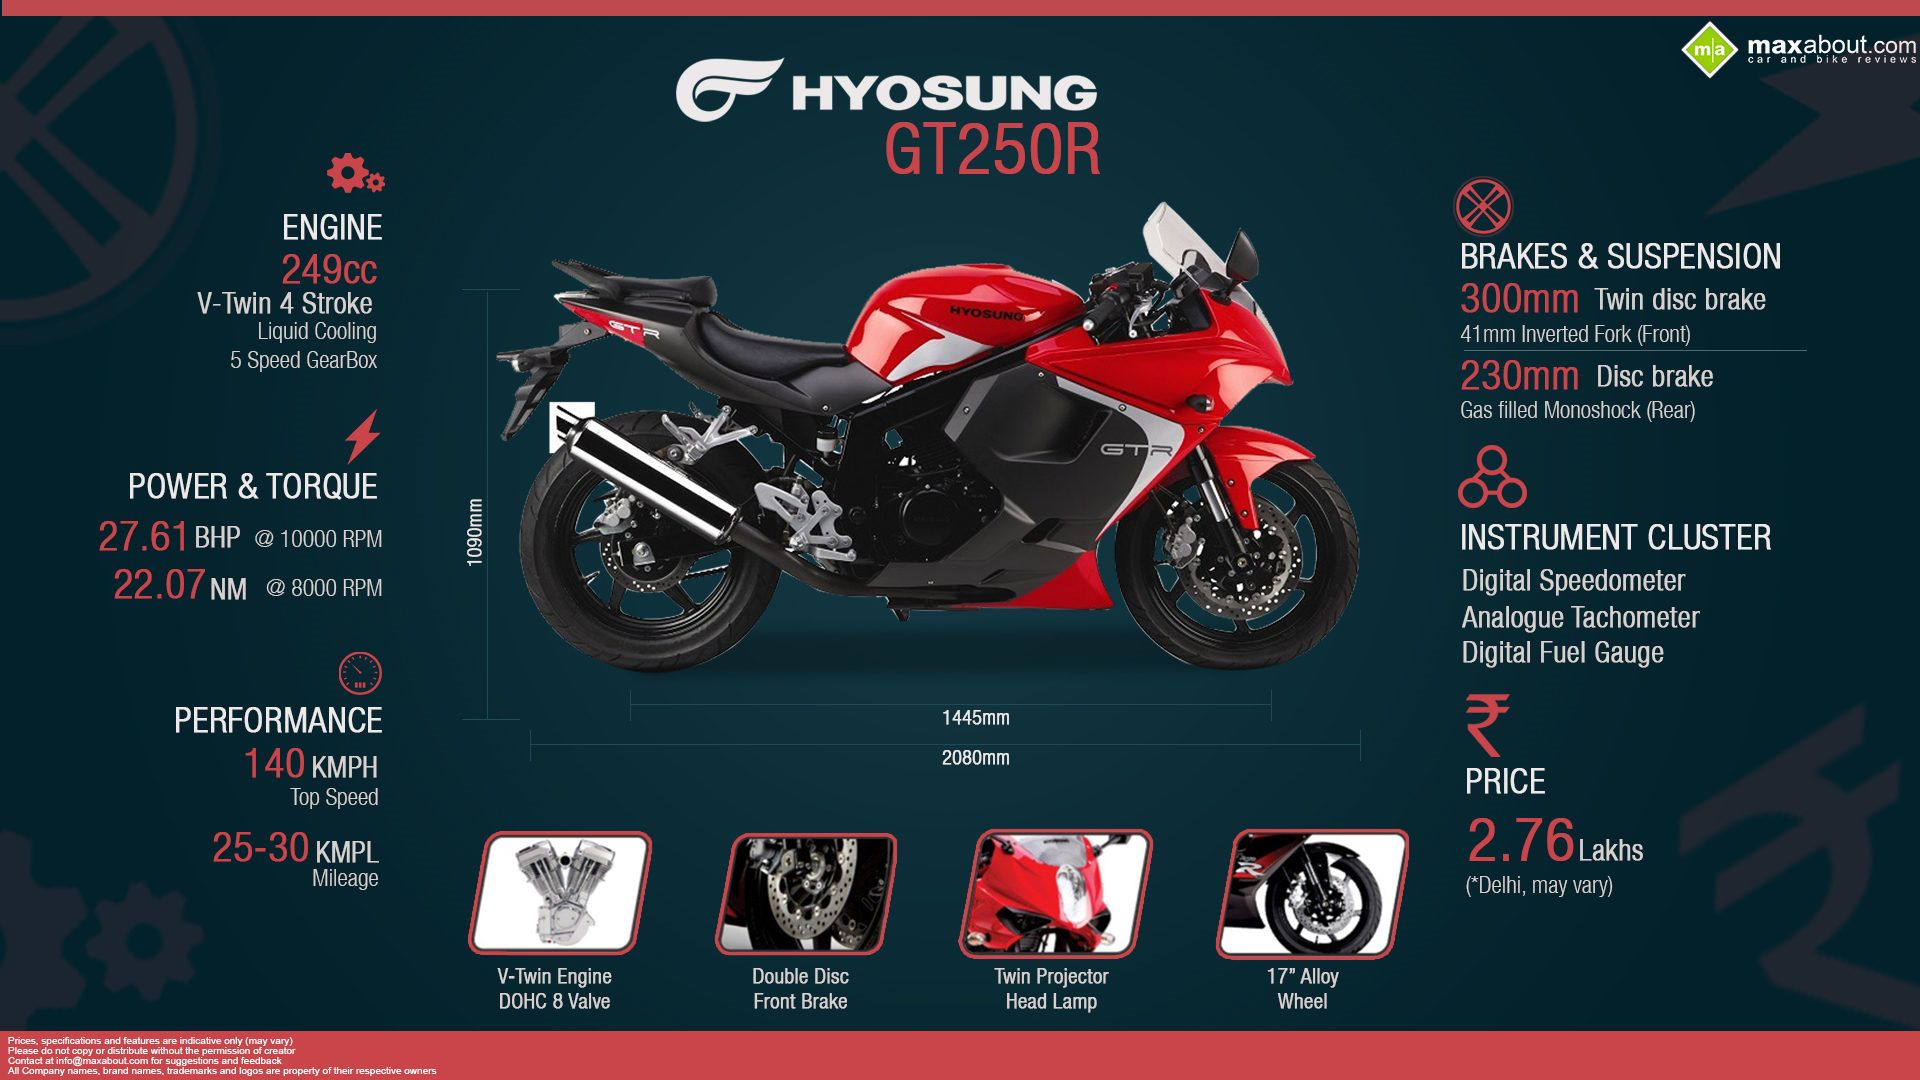 Must Know Stuff About The 2014 Hyosung Gt250r - Hyosung Gt250r Wallpaper Hd , HD Wallpaper & Backgrounds